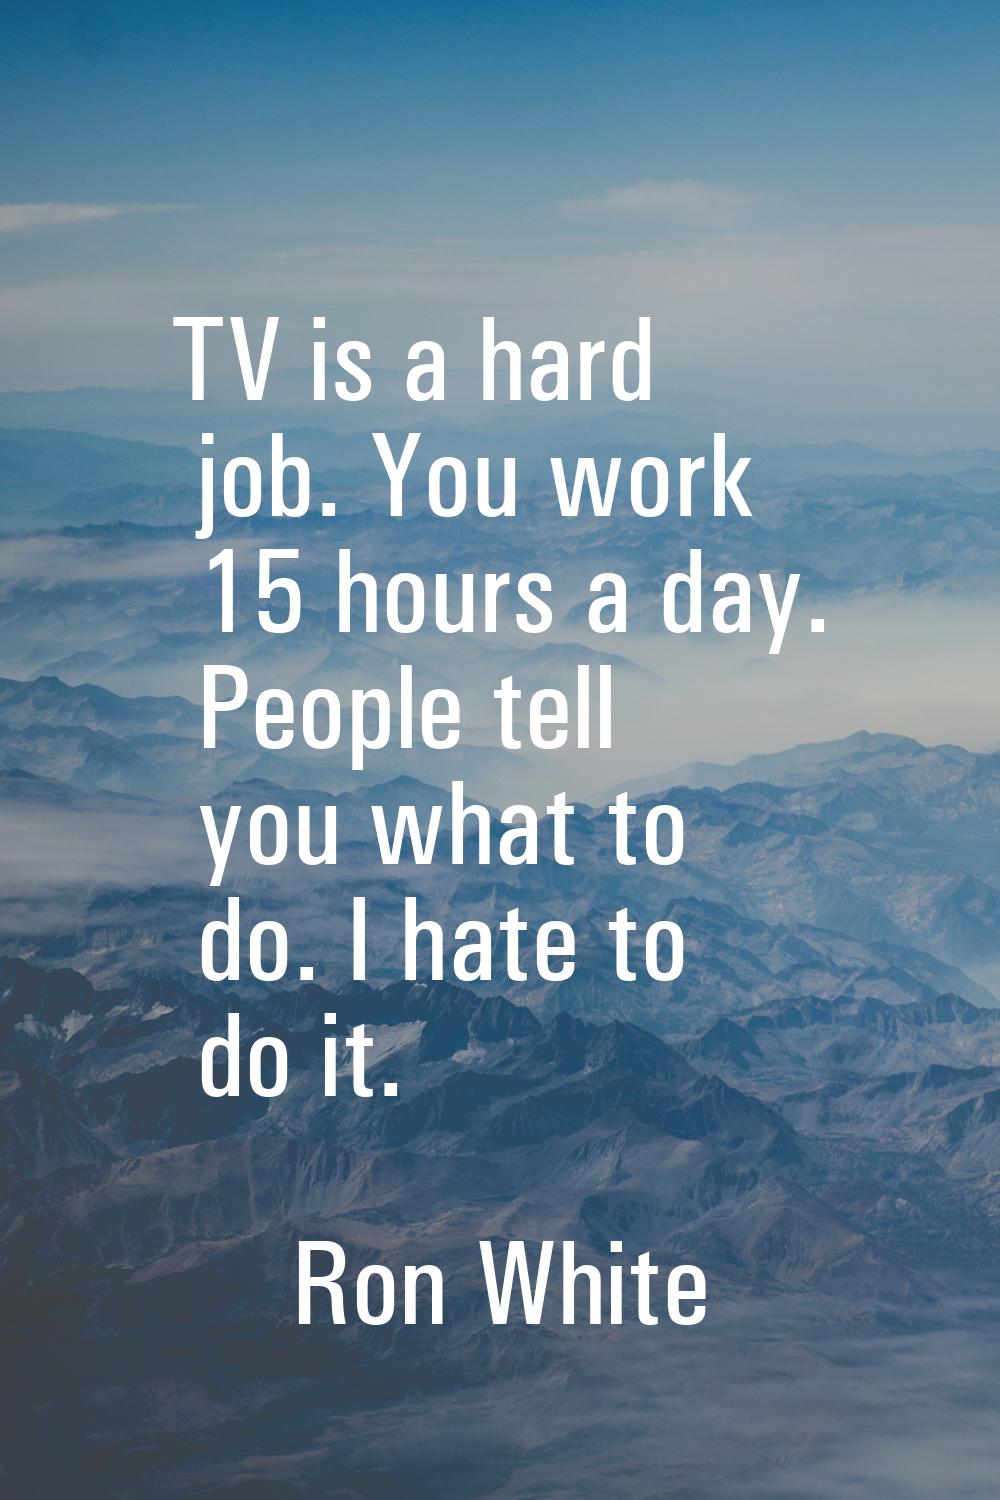 TV is a hard job. You work 15 hours a day. People tell you what to do. I hate to do it.